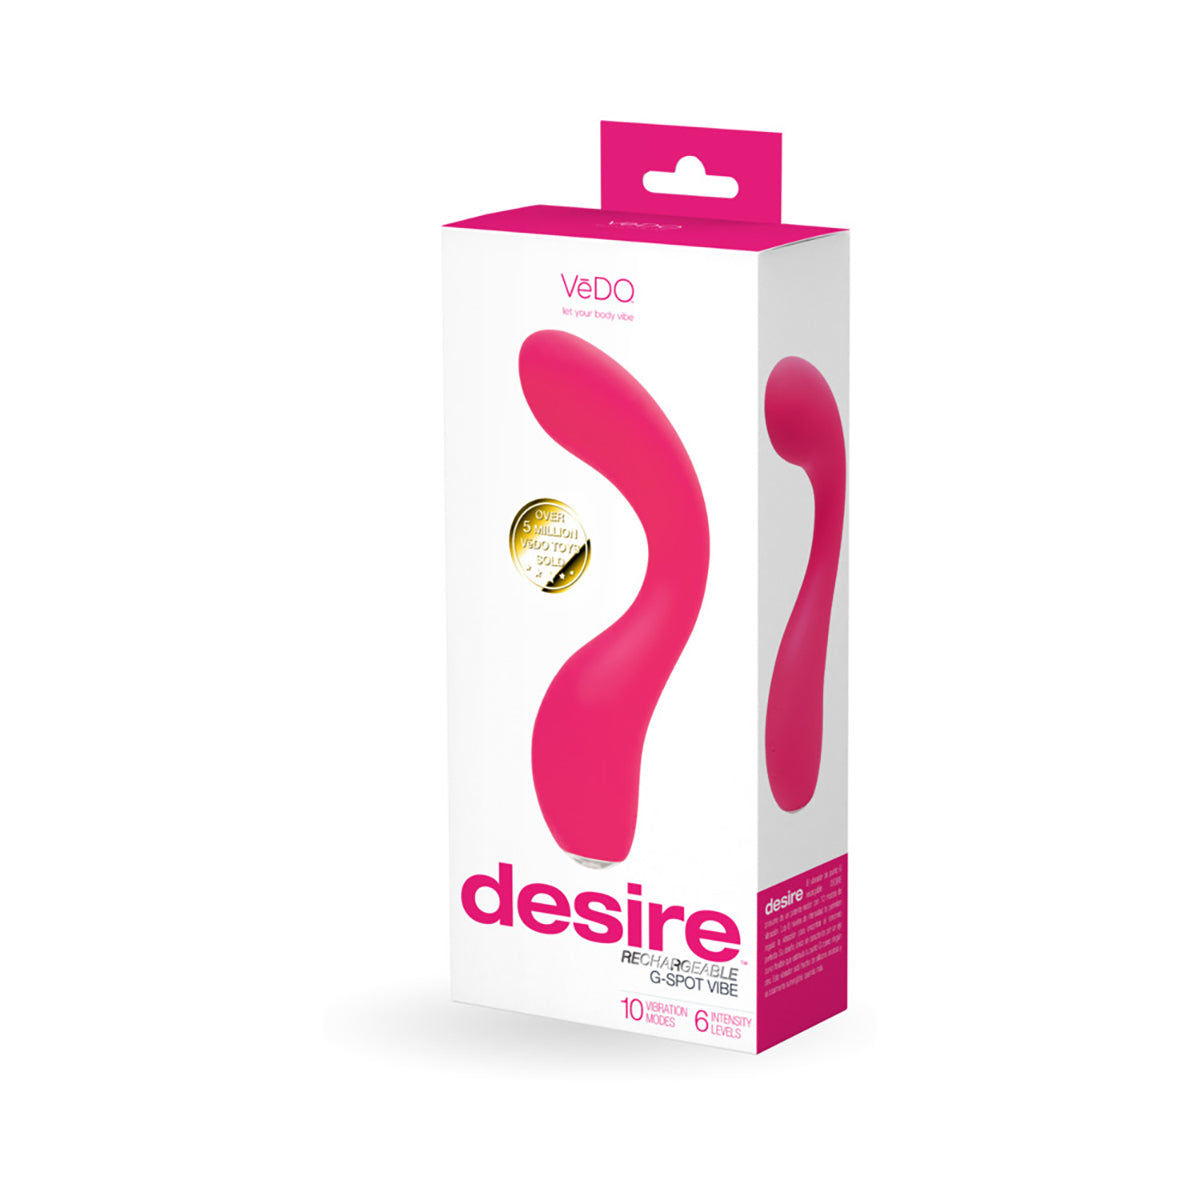 VeDO Desire Rechargeable Gspot Vibe Pink